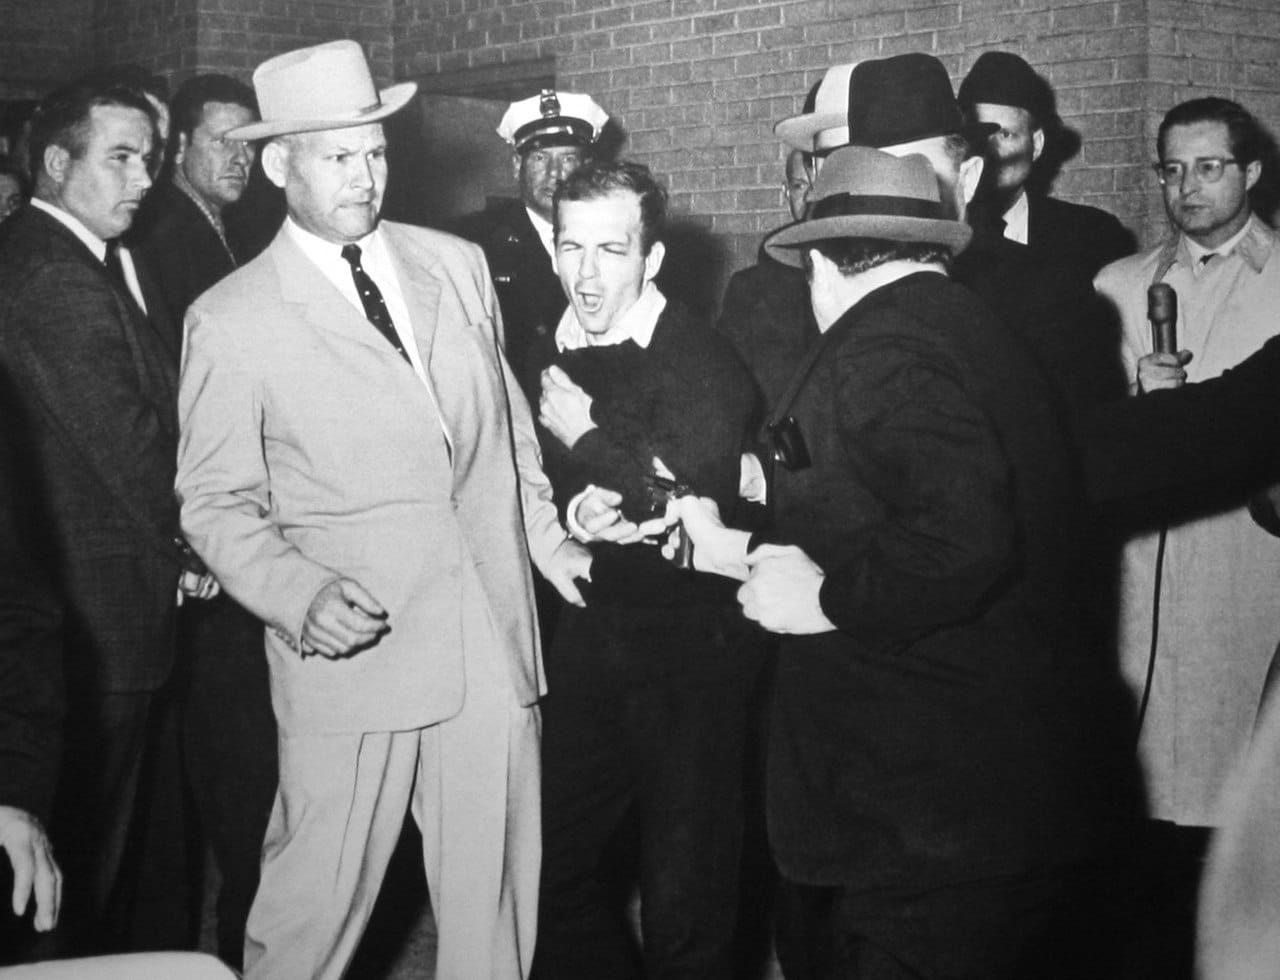 1280px Ruby shoots Oswald | JFK assassinated 59 years ago – here are the shocking news videos and pics from that day | The Paradise News